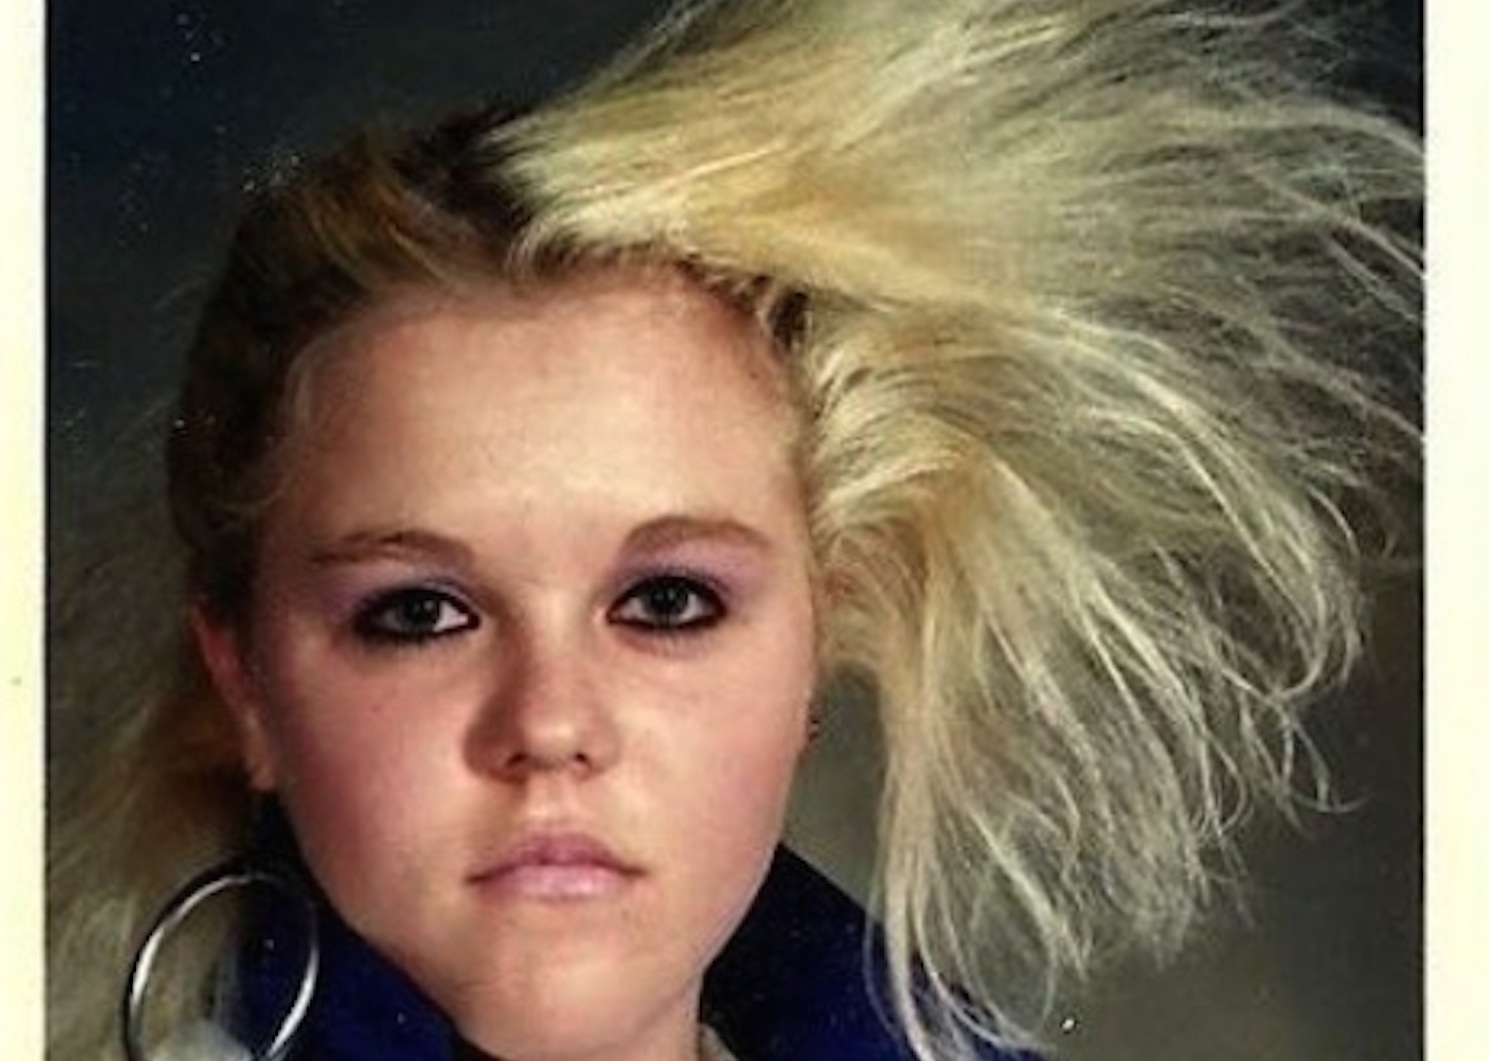 here's a collection of the most ridiculous female hairstyles